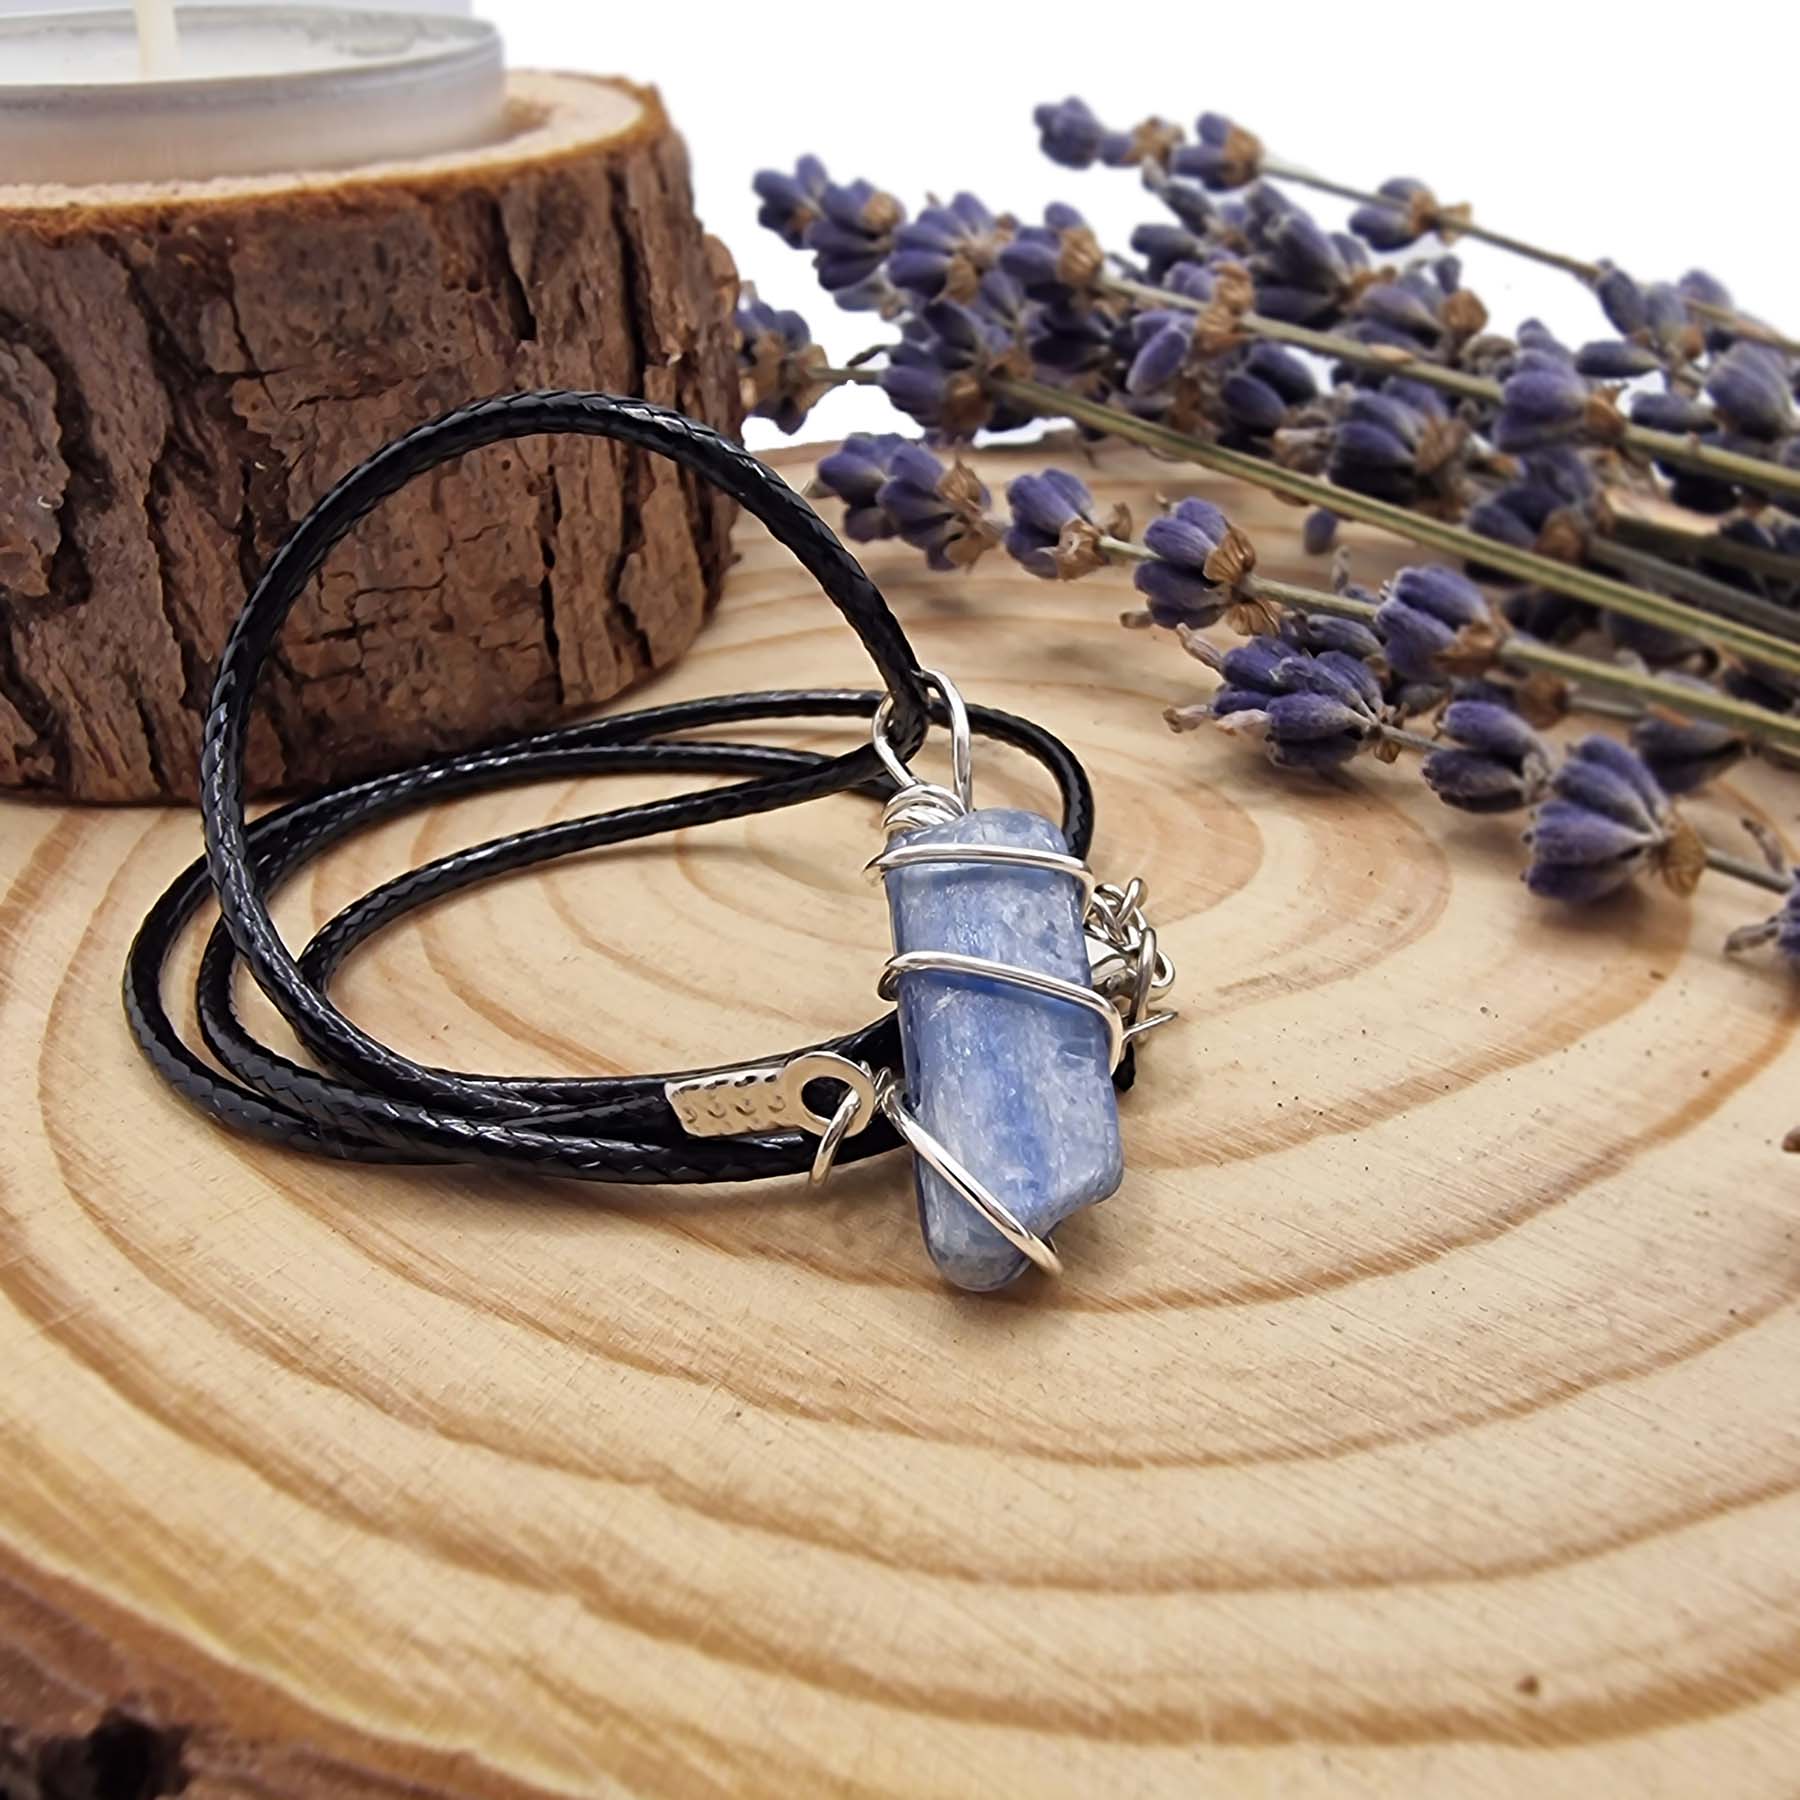 Buy Kyanite Necklace, Blue Kyanite Driftwood Jewelry, Vermeil Gold Chain,  Calming Jewelry, Natural Wood Jewelry, Organic Necklace, Lenti Jewelry  Online in India - Etsy